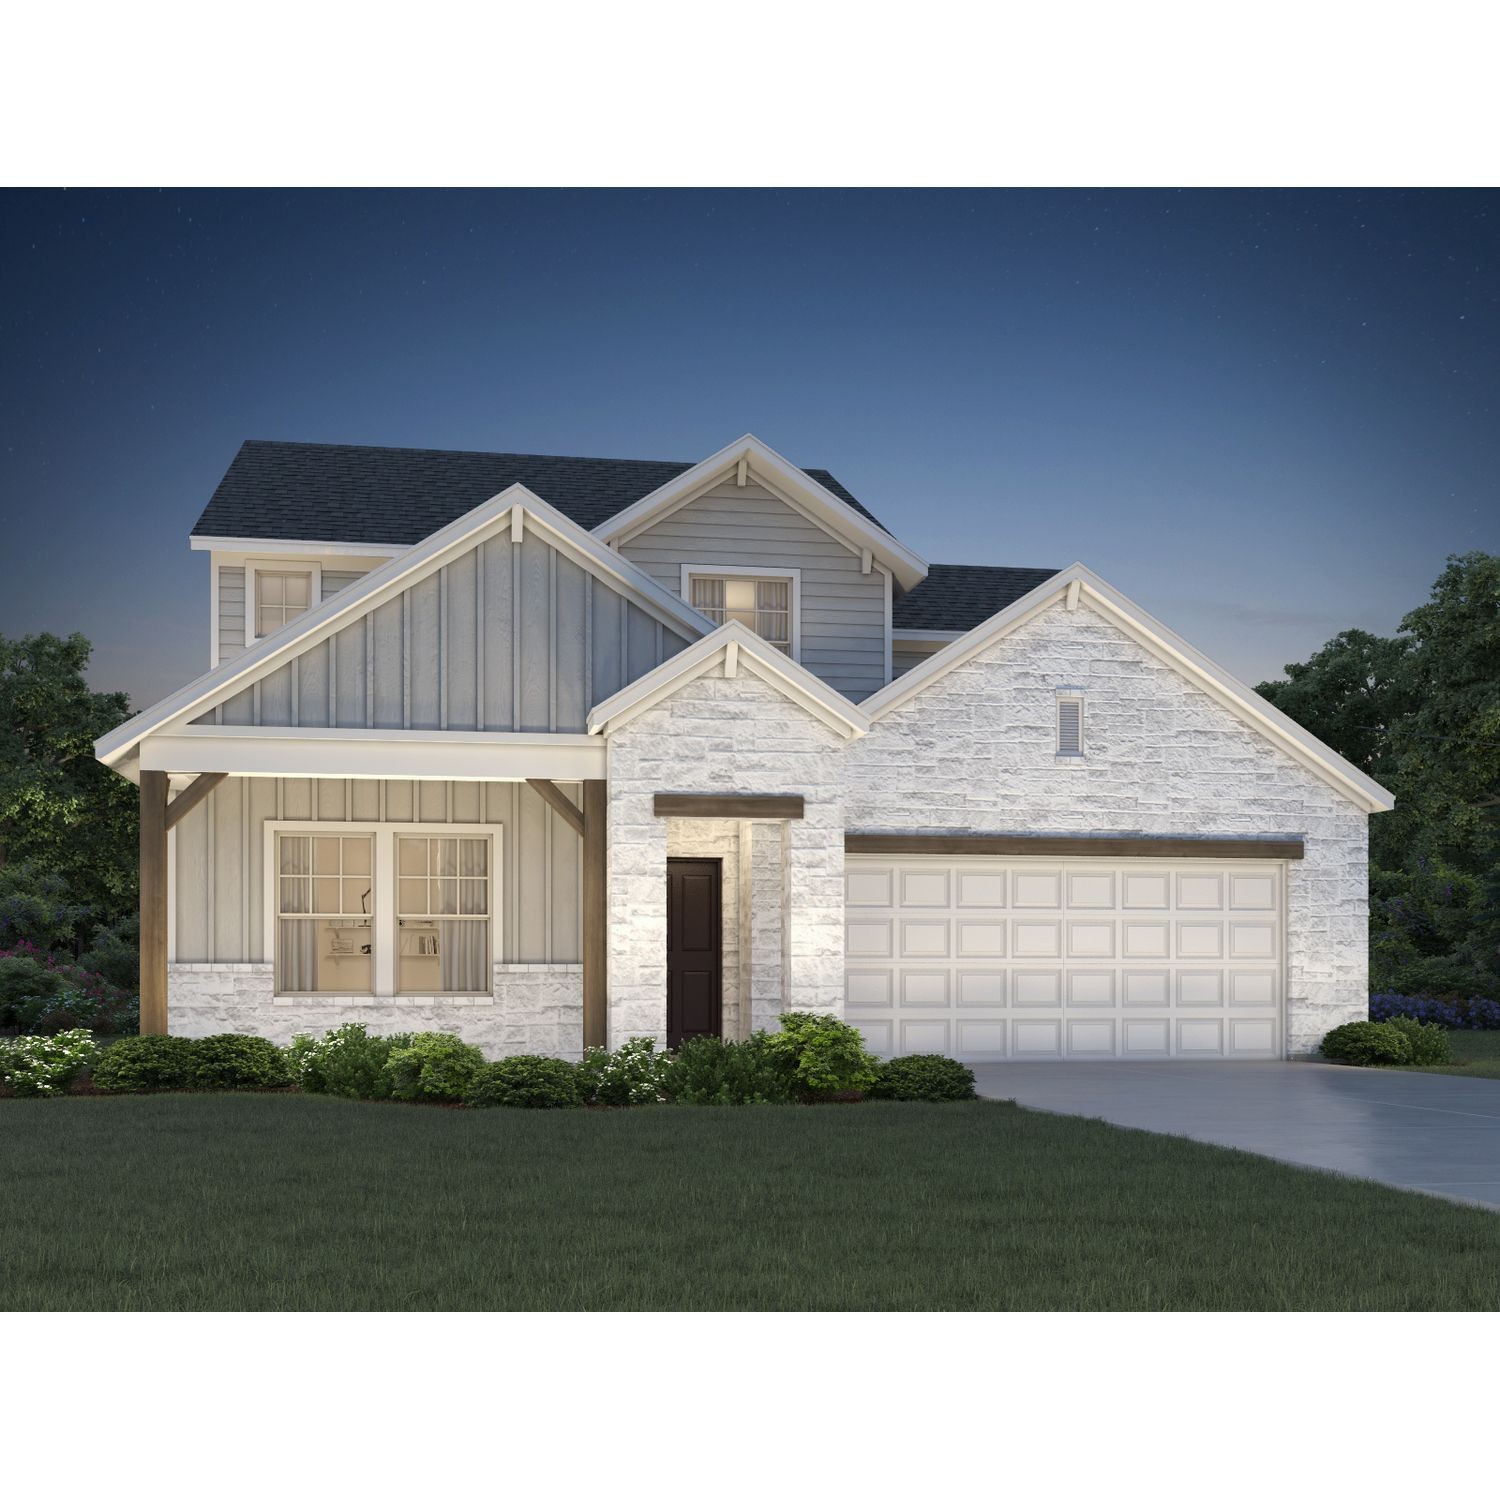 2. Riverbend At Double Eagle - Boulevard Collection